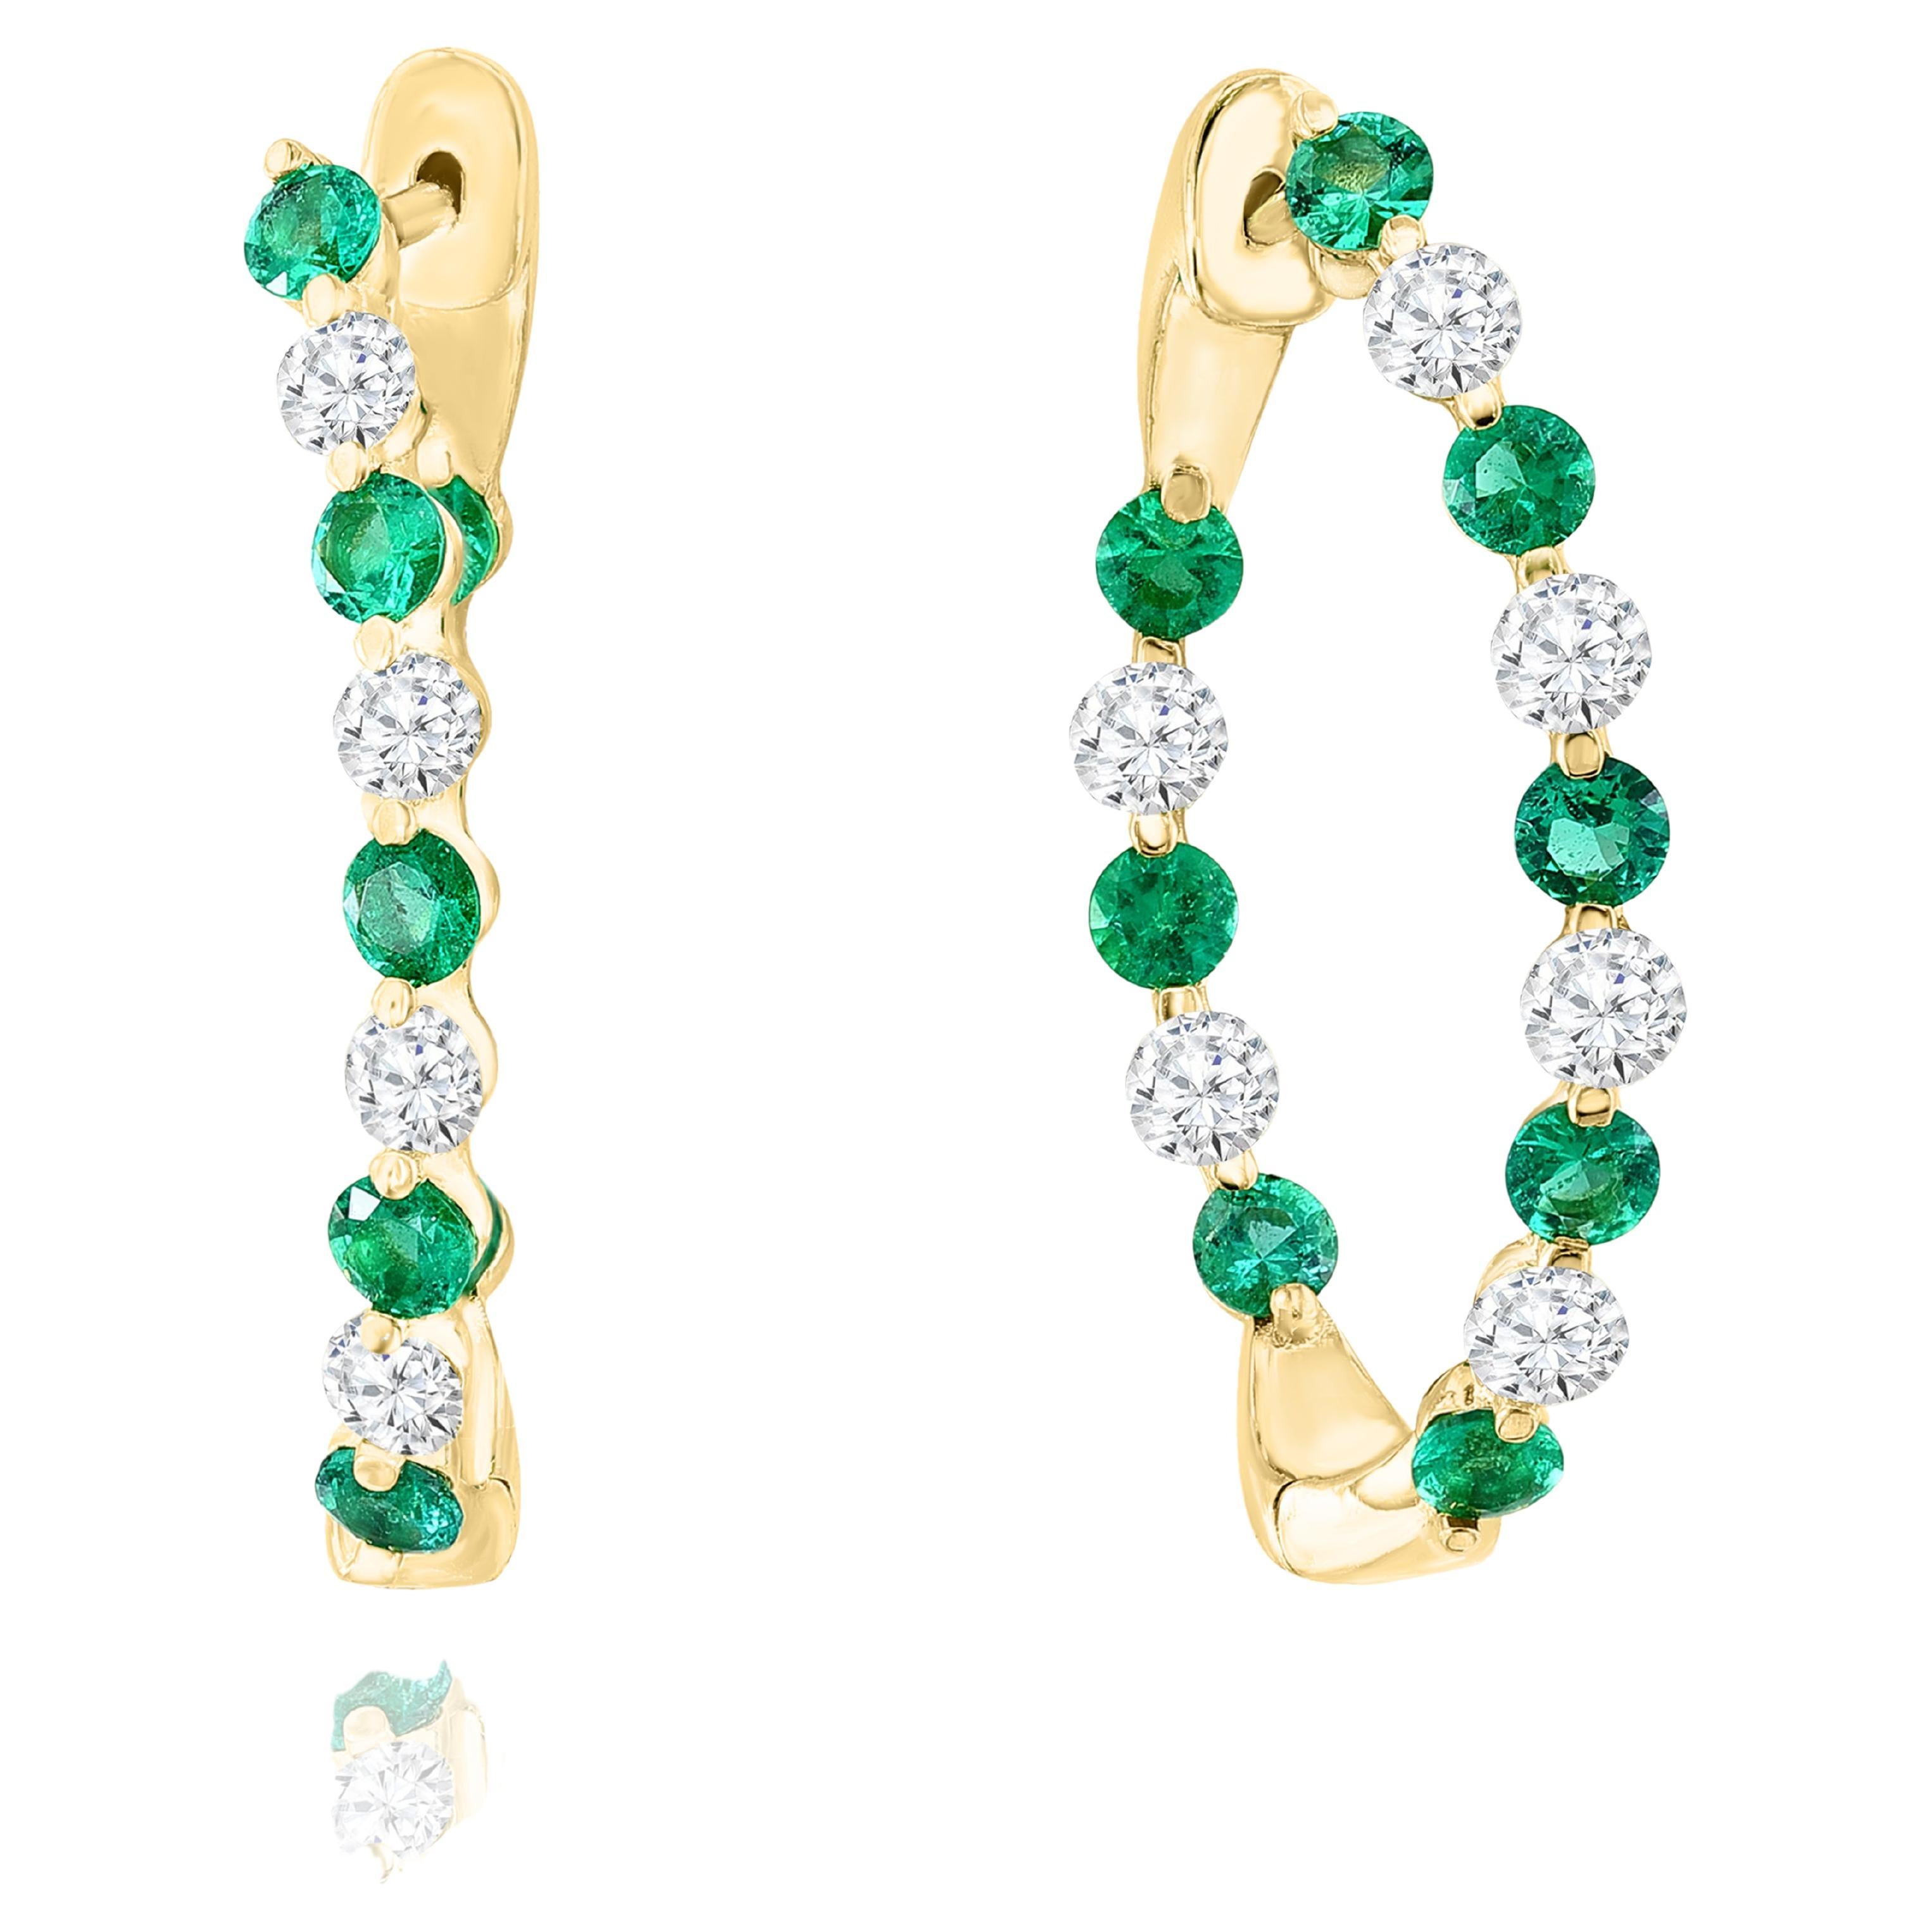 1.41 Carat Round Cut Emerald and Diamond Hoop Earrings in 14K Yellow Gold